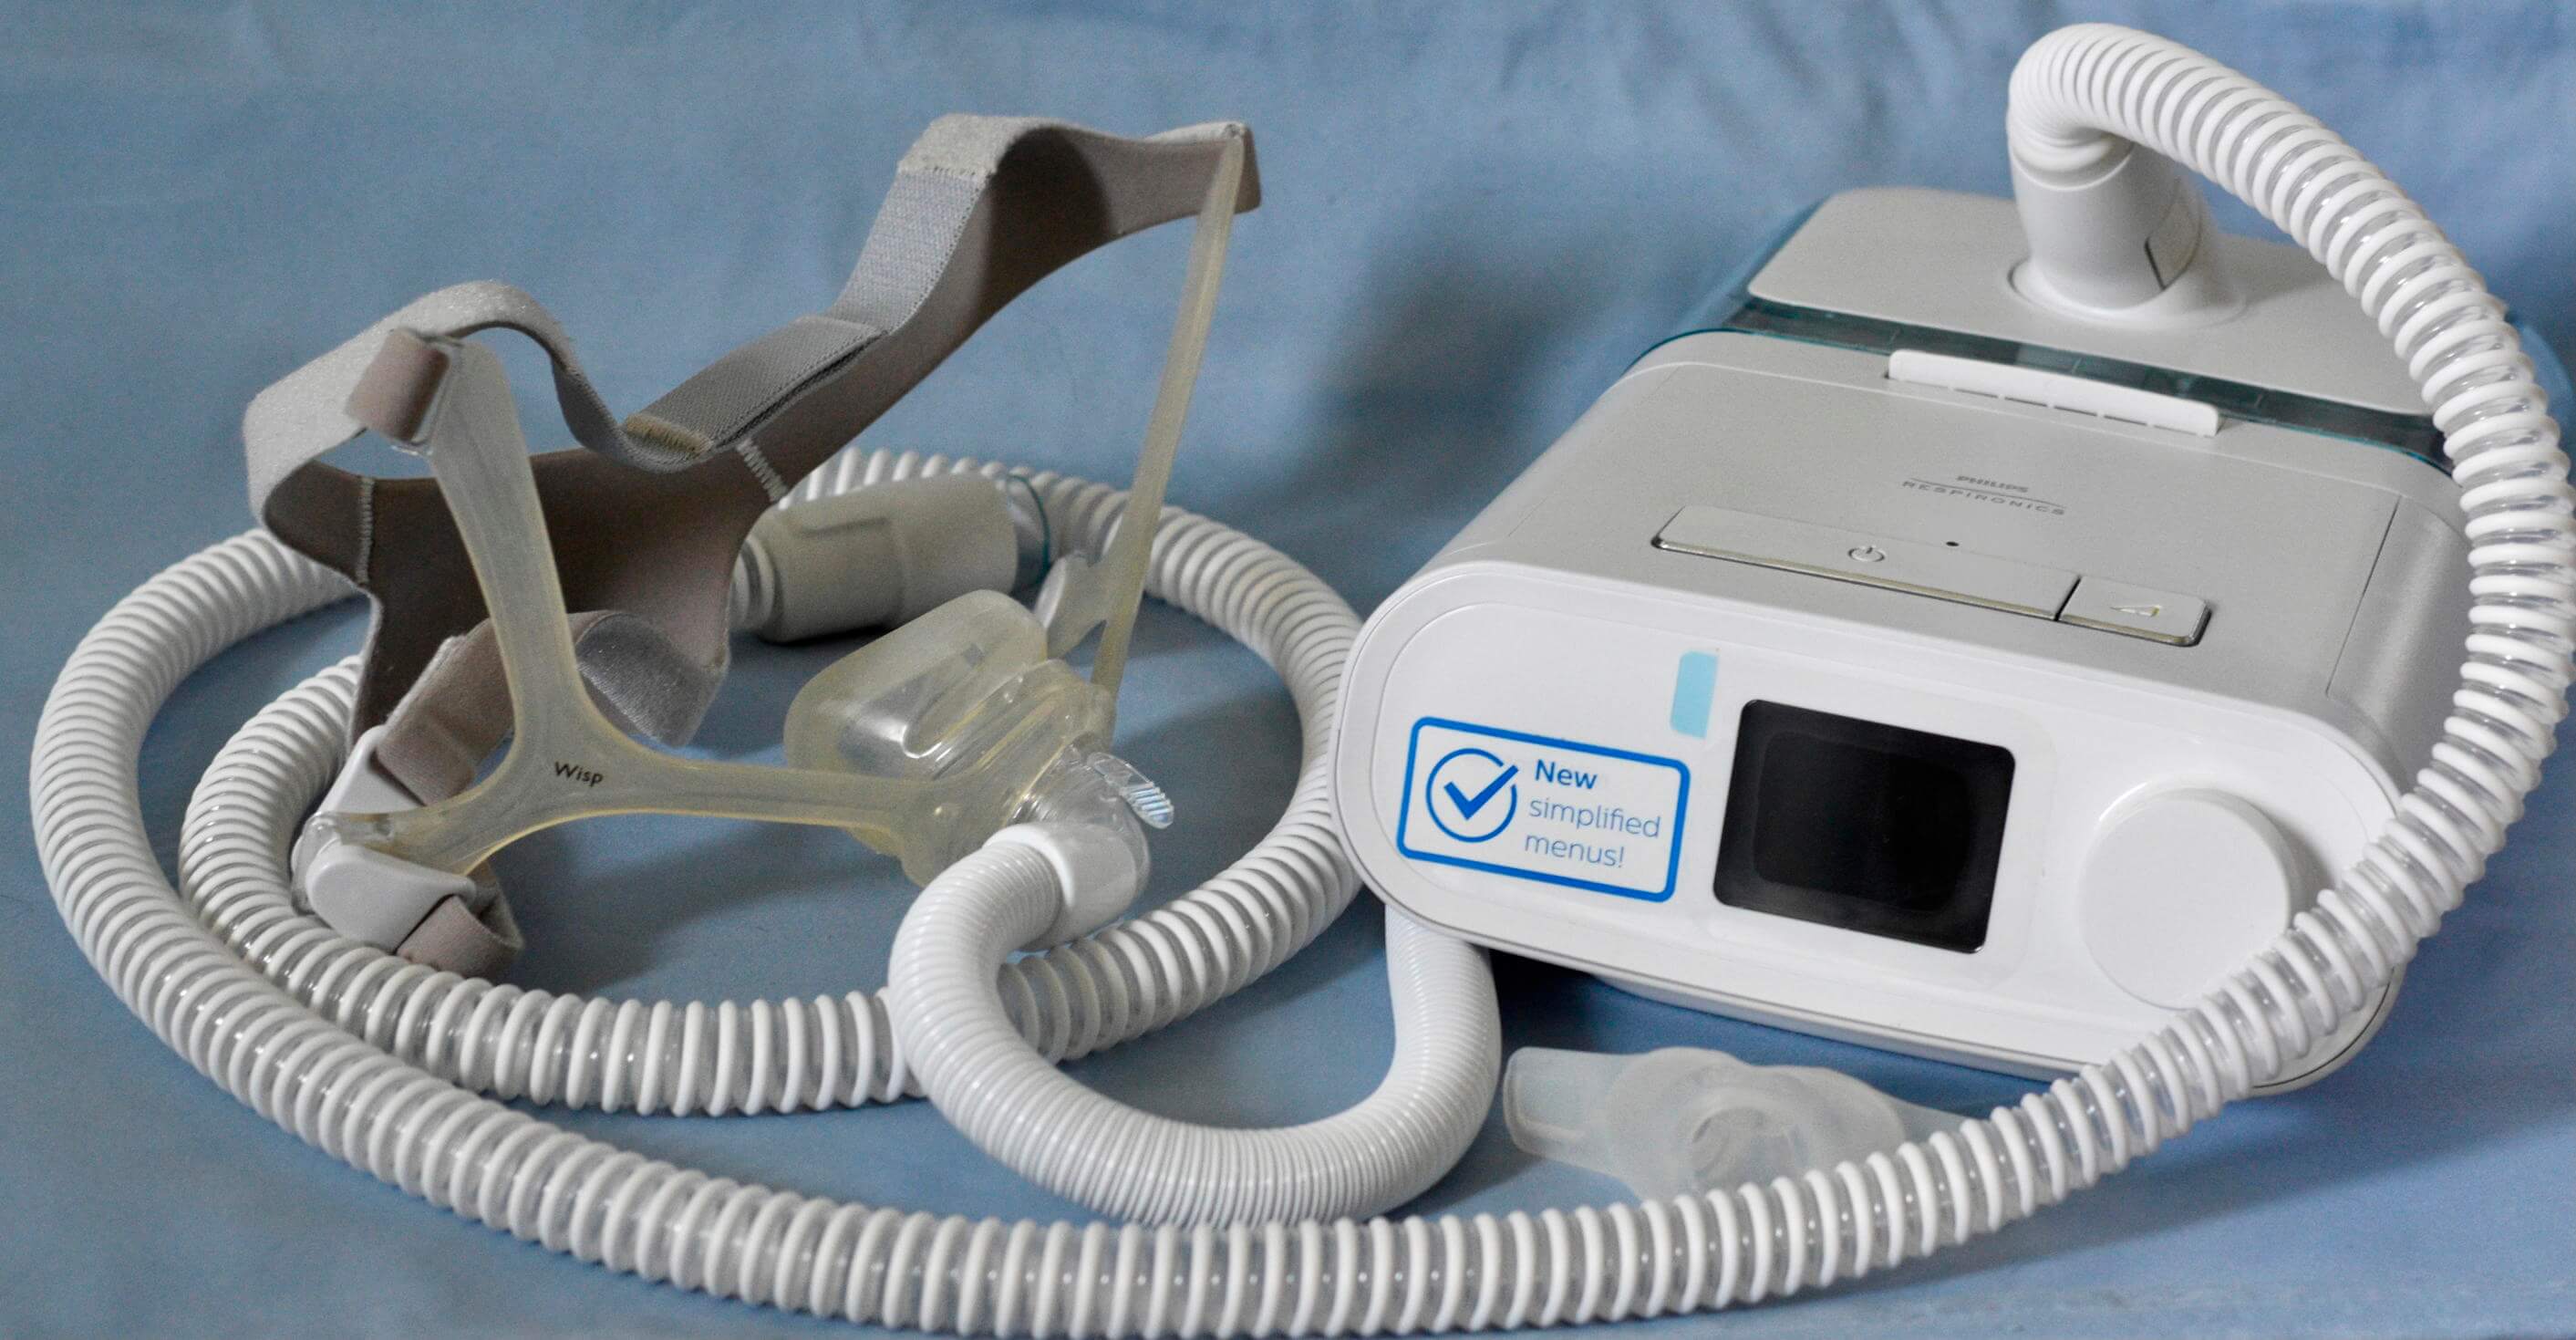 Example of a Legacy Medical Device